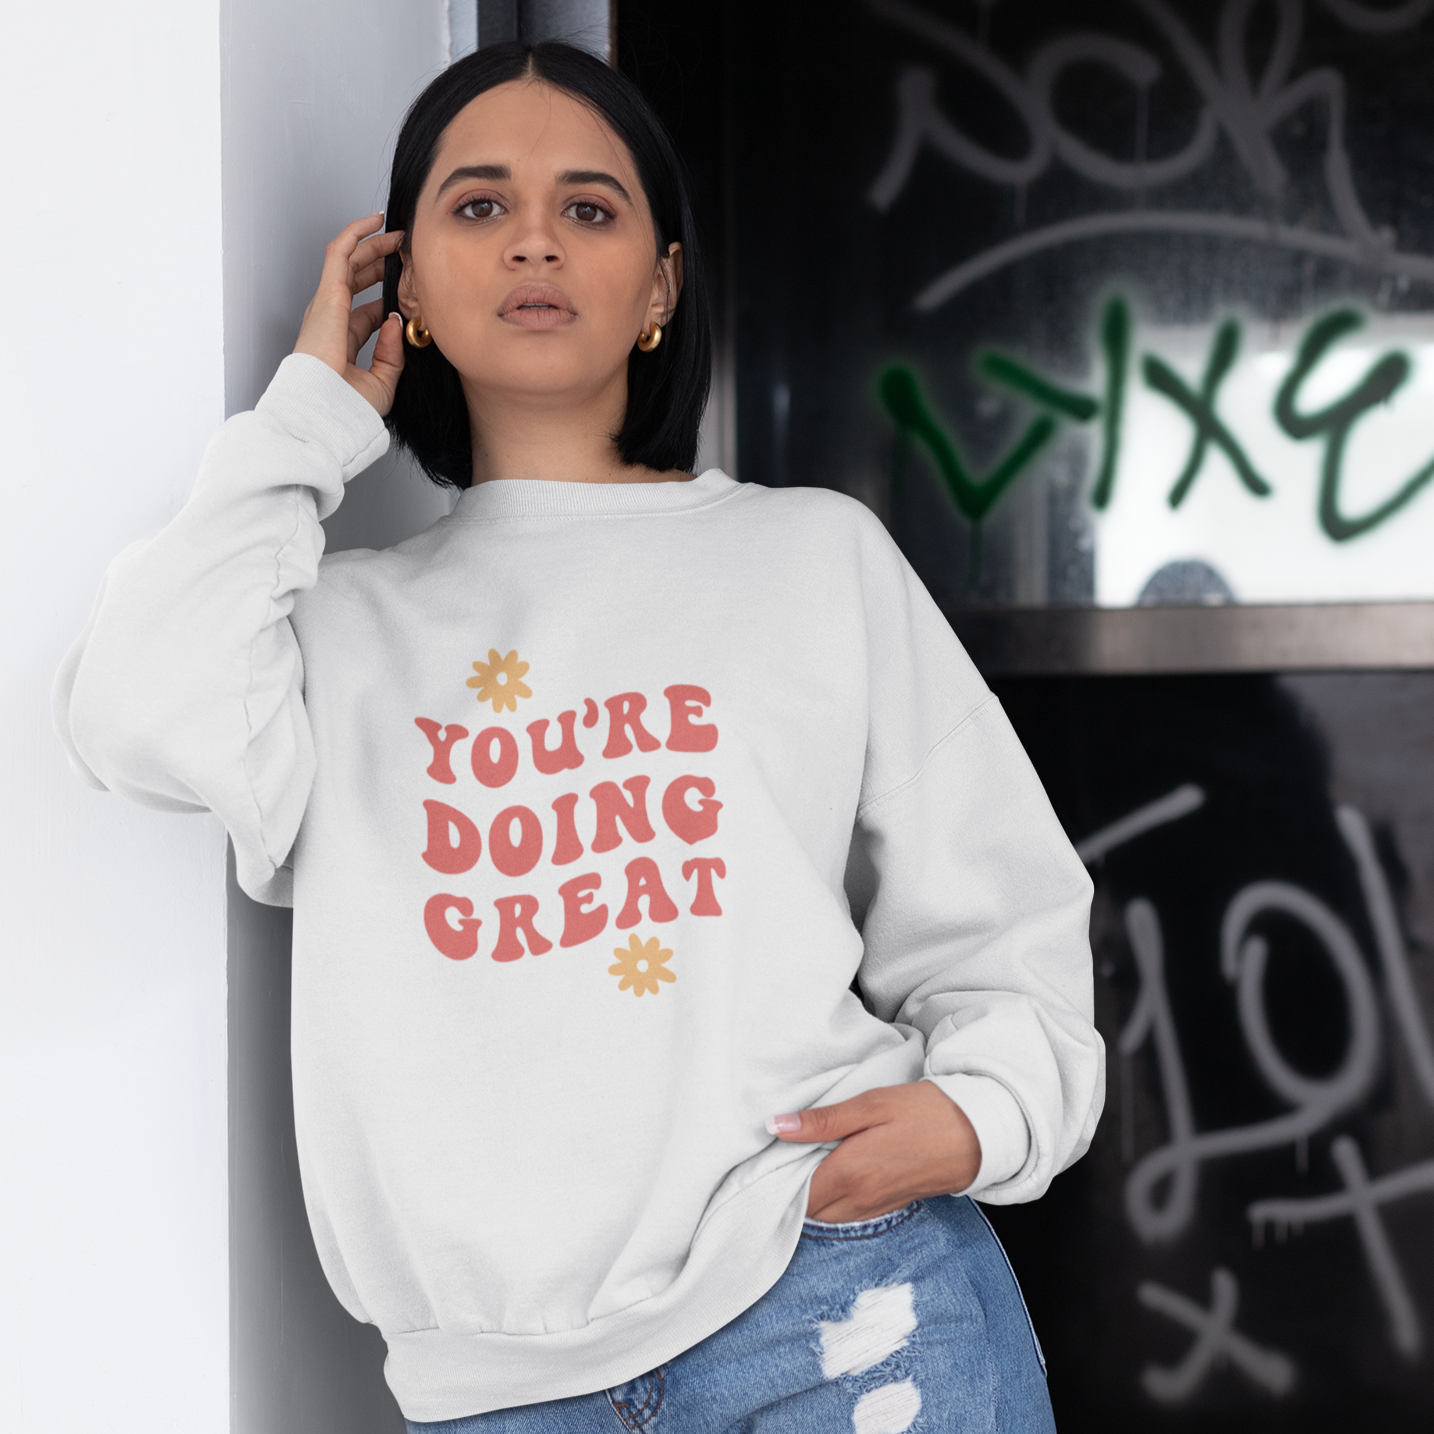 You're Doing Great- Full Color Heat Transfer